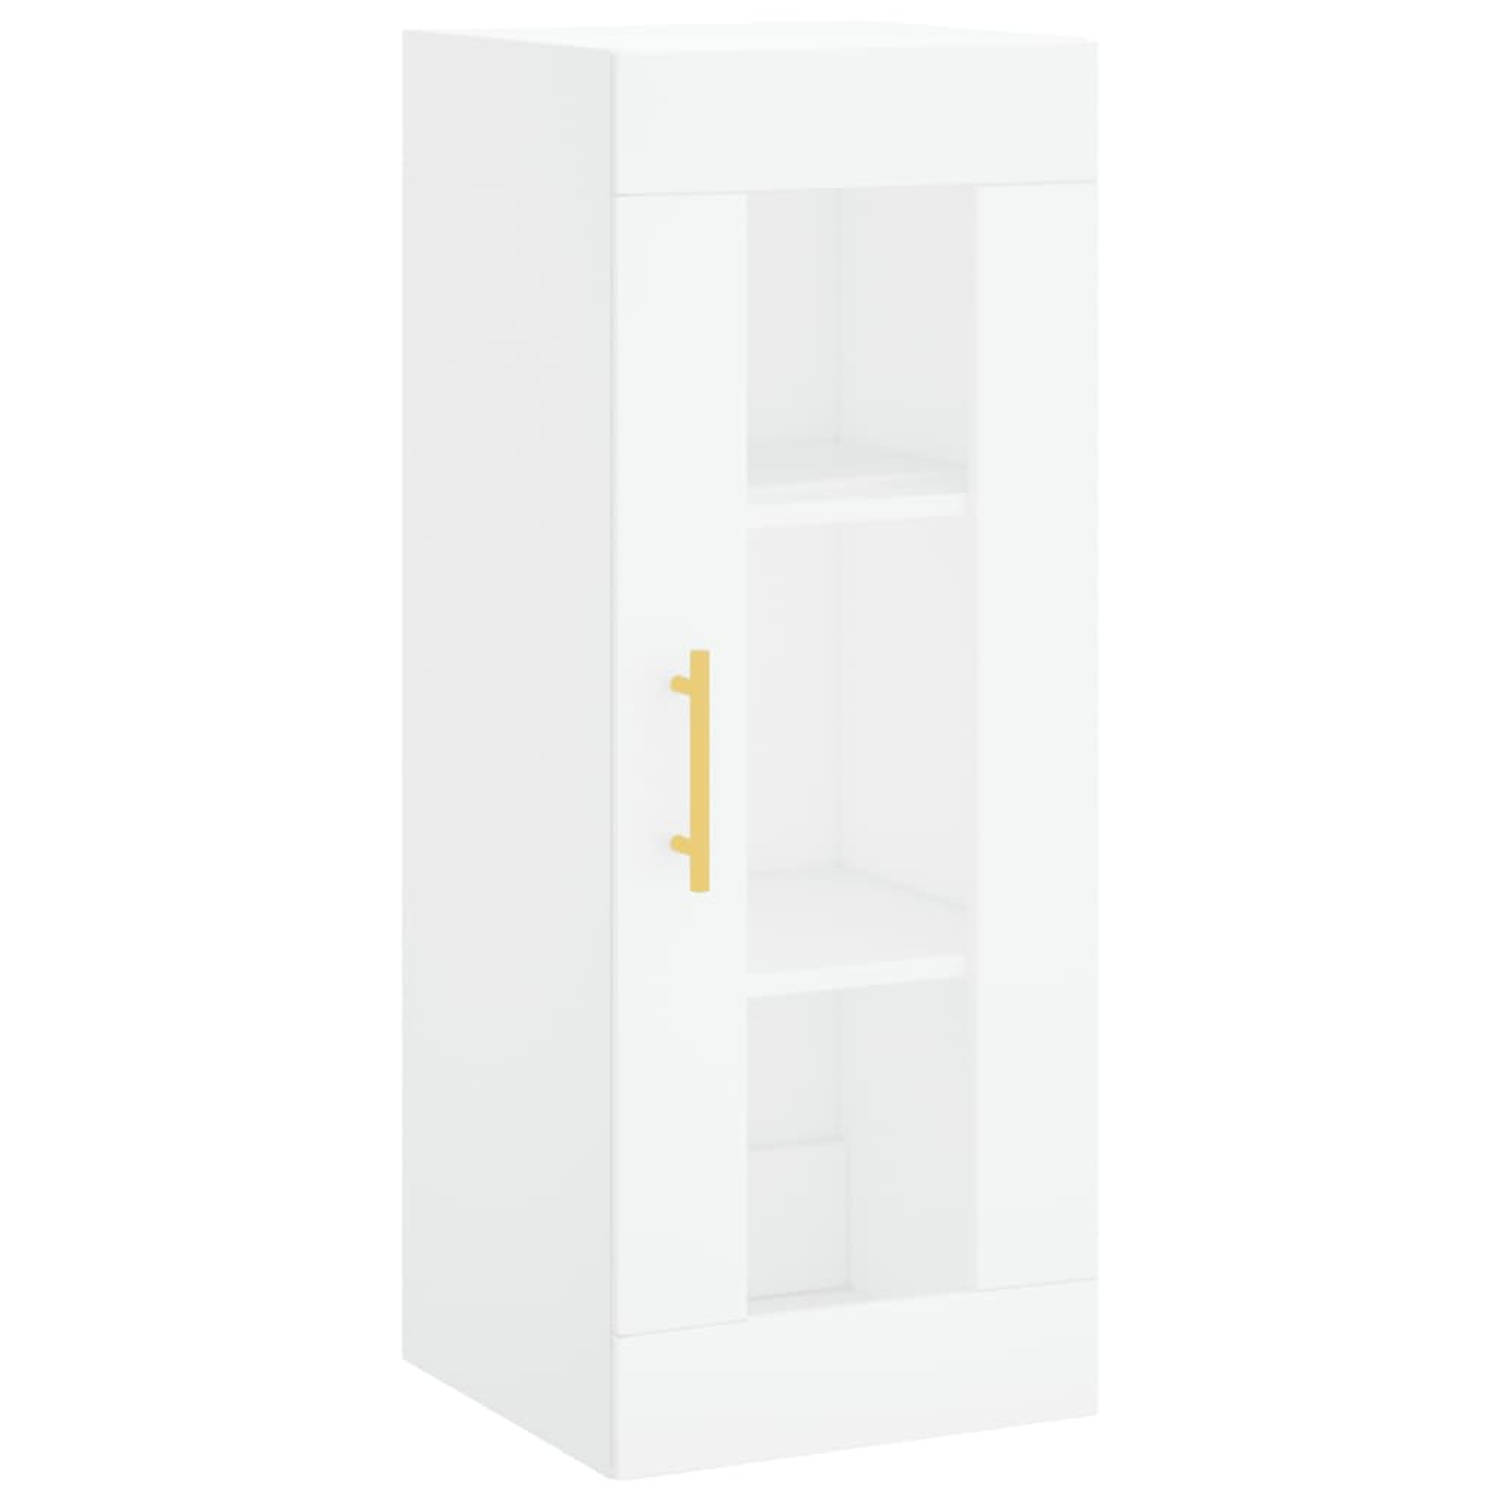 The Living Store Wandkast - zwevende opbergkast - 34.5 x 34 x 90 cm - wit